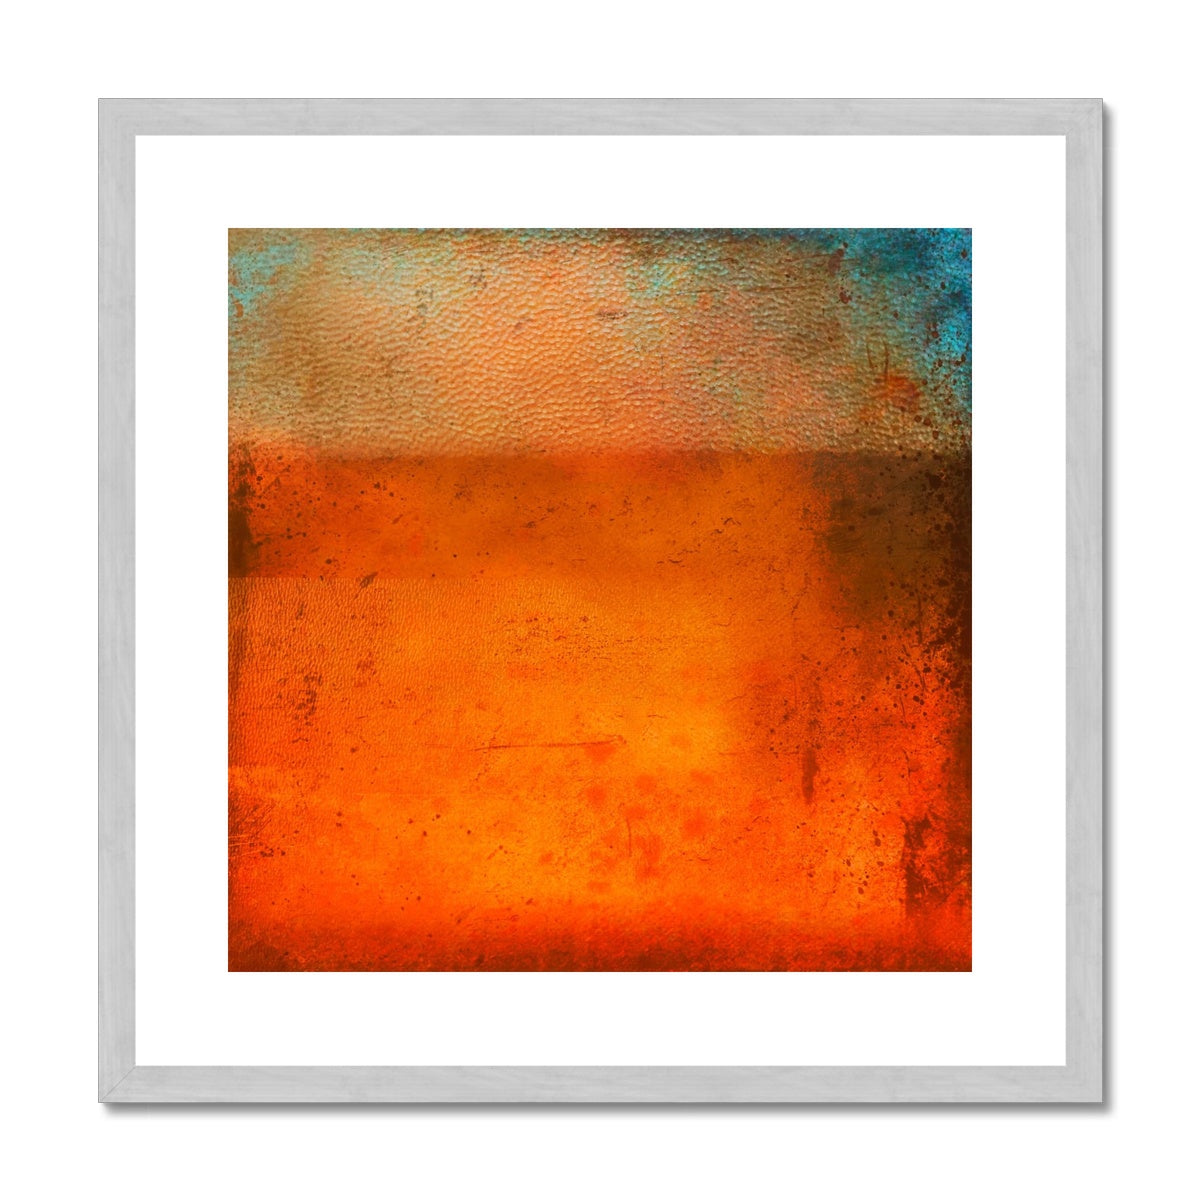 Sunset Horizon Abstract Painting | Antique Framed & Mounted Prints From Scotland-Antique Framed & Mounted Prints-Abstract & Impressionistic Art Gallery-20"x20"-Silver Frame-Paintings, Prints, Homeware, Art Gifts From Scotland By Scottish Artist Kevin Hunter